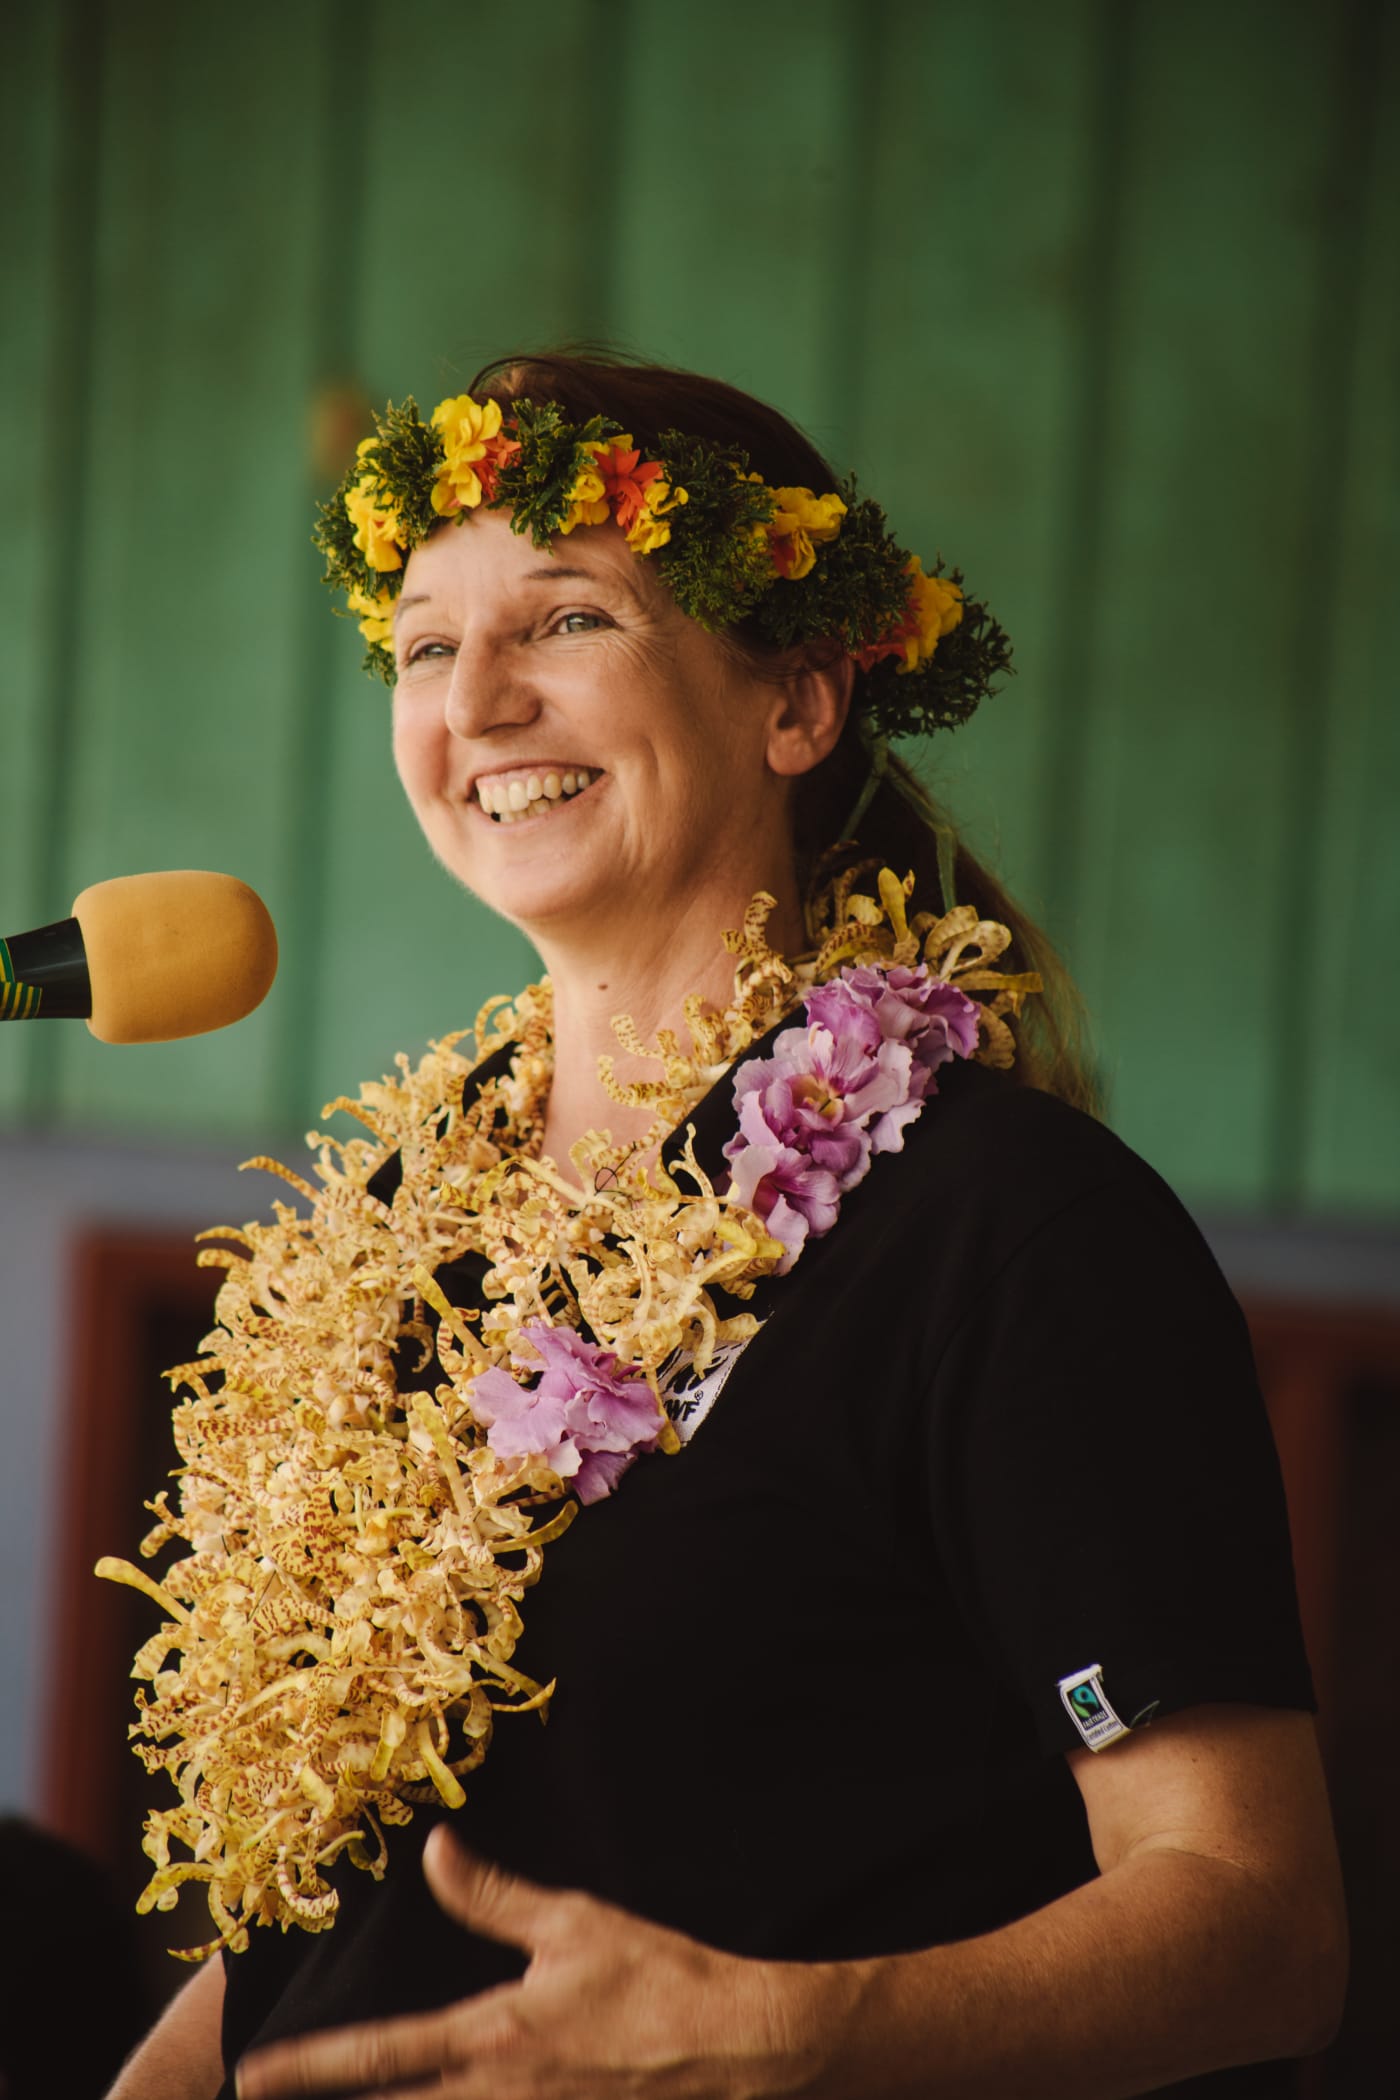 Dr Gilly Llewellyn (WWF-Australia conservation director) giving a speech at the Women's Saving Club at the launching celebration, Gizo, Solomon Islands, 20 June 2014.
On June 20th, 2014 women from the seven zones included within the Gizo and Nusatuva Women’s Saving Club came together in Gizo to celebrate the launching of the Saving’s Club loan component and revolving funds. .The launching event was significant, as it marked the handing over of funds from donors to jump start the loan component of the Saving’s Club. .Saving’s Club members paraded the streets, they delivered speeches to fellow savers and families, they performed traditional dances and songs, and they presented gifts to those who assisted along the way.